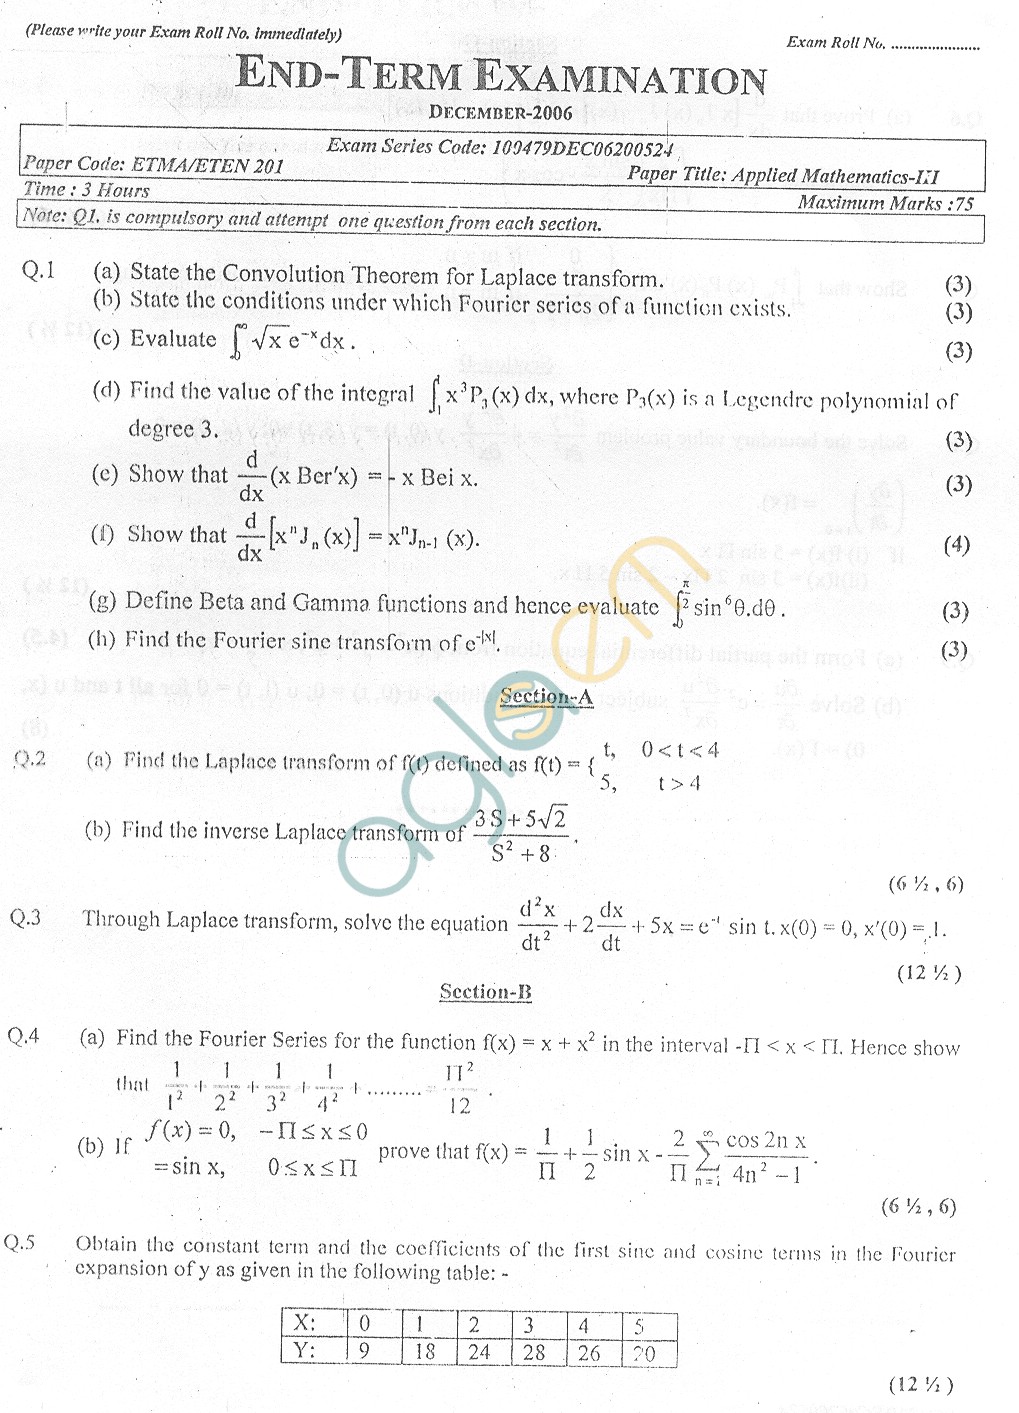 GGSIPU Question Papers Third Semester  End Term 2006  ETEN-201